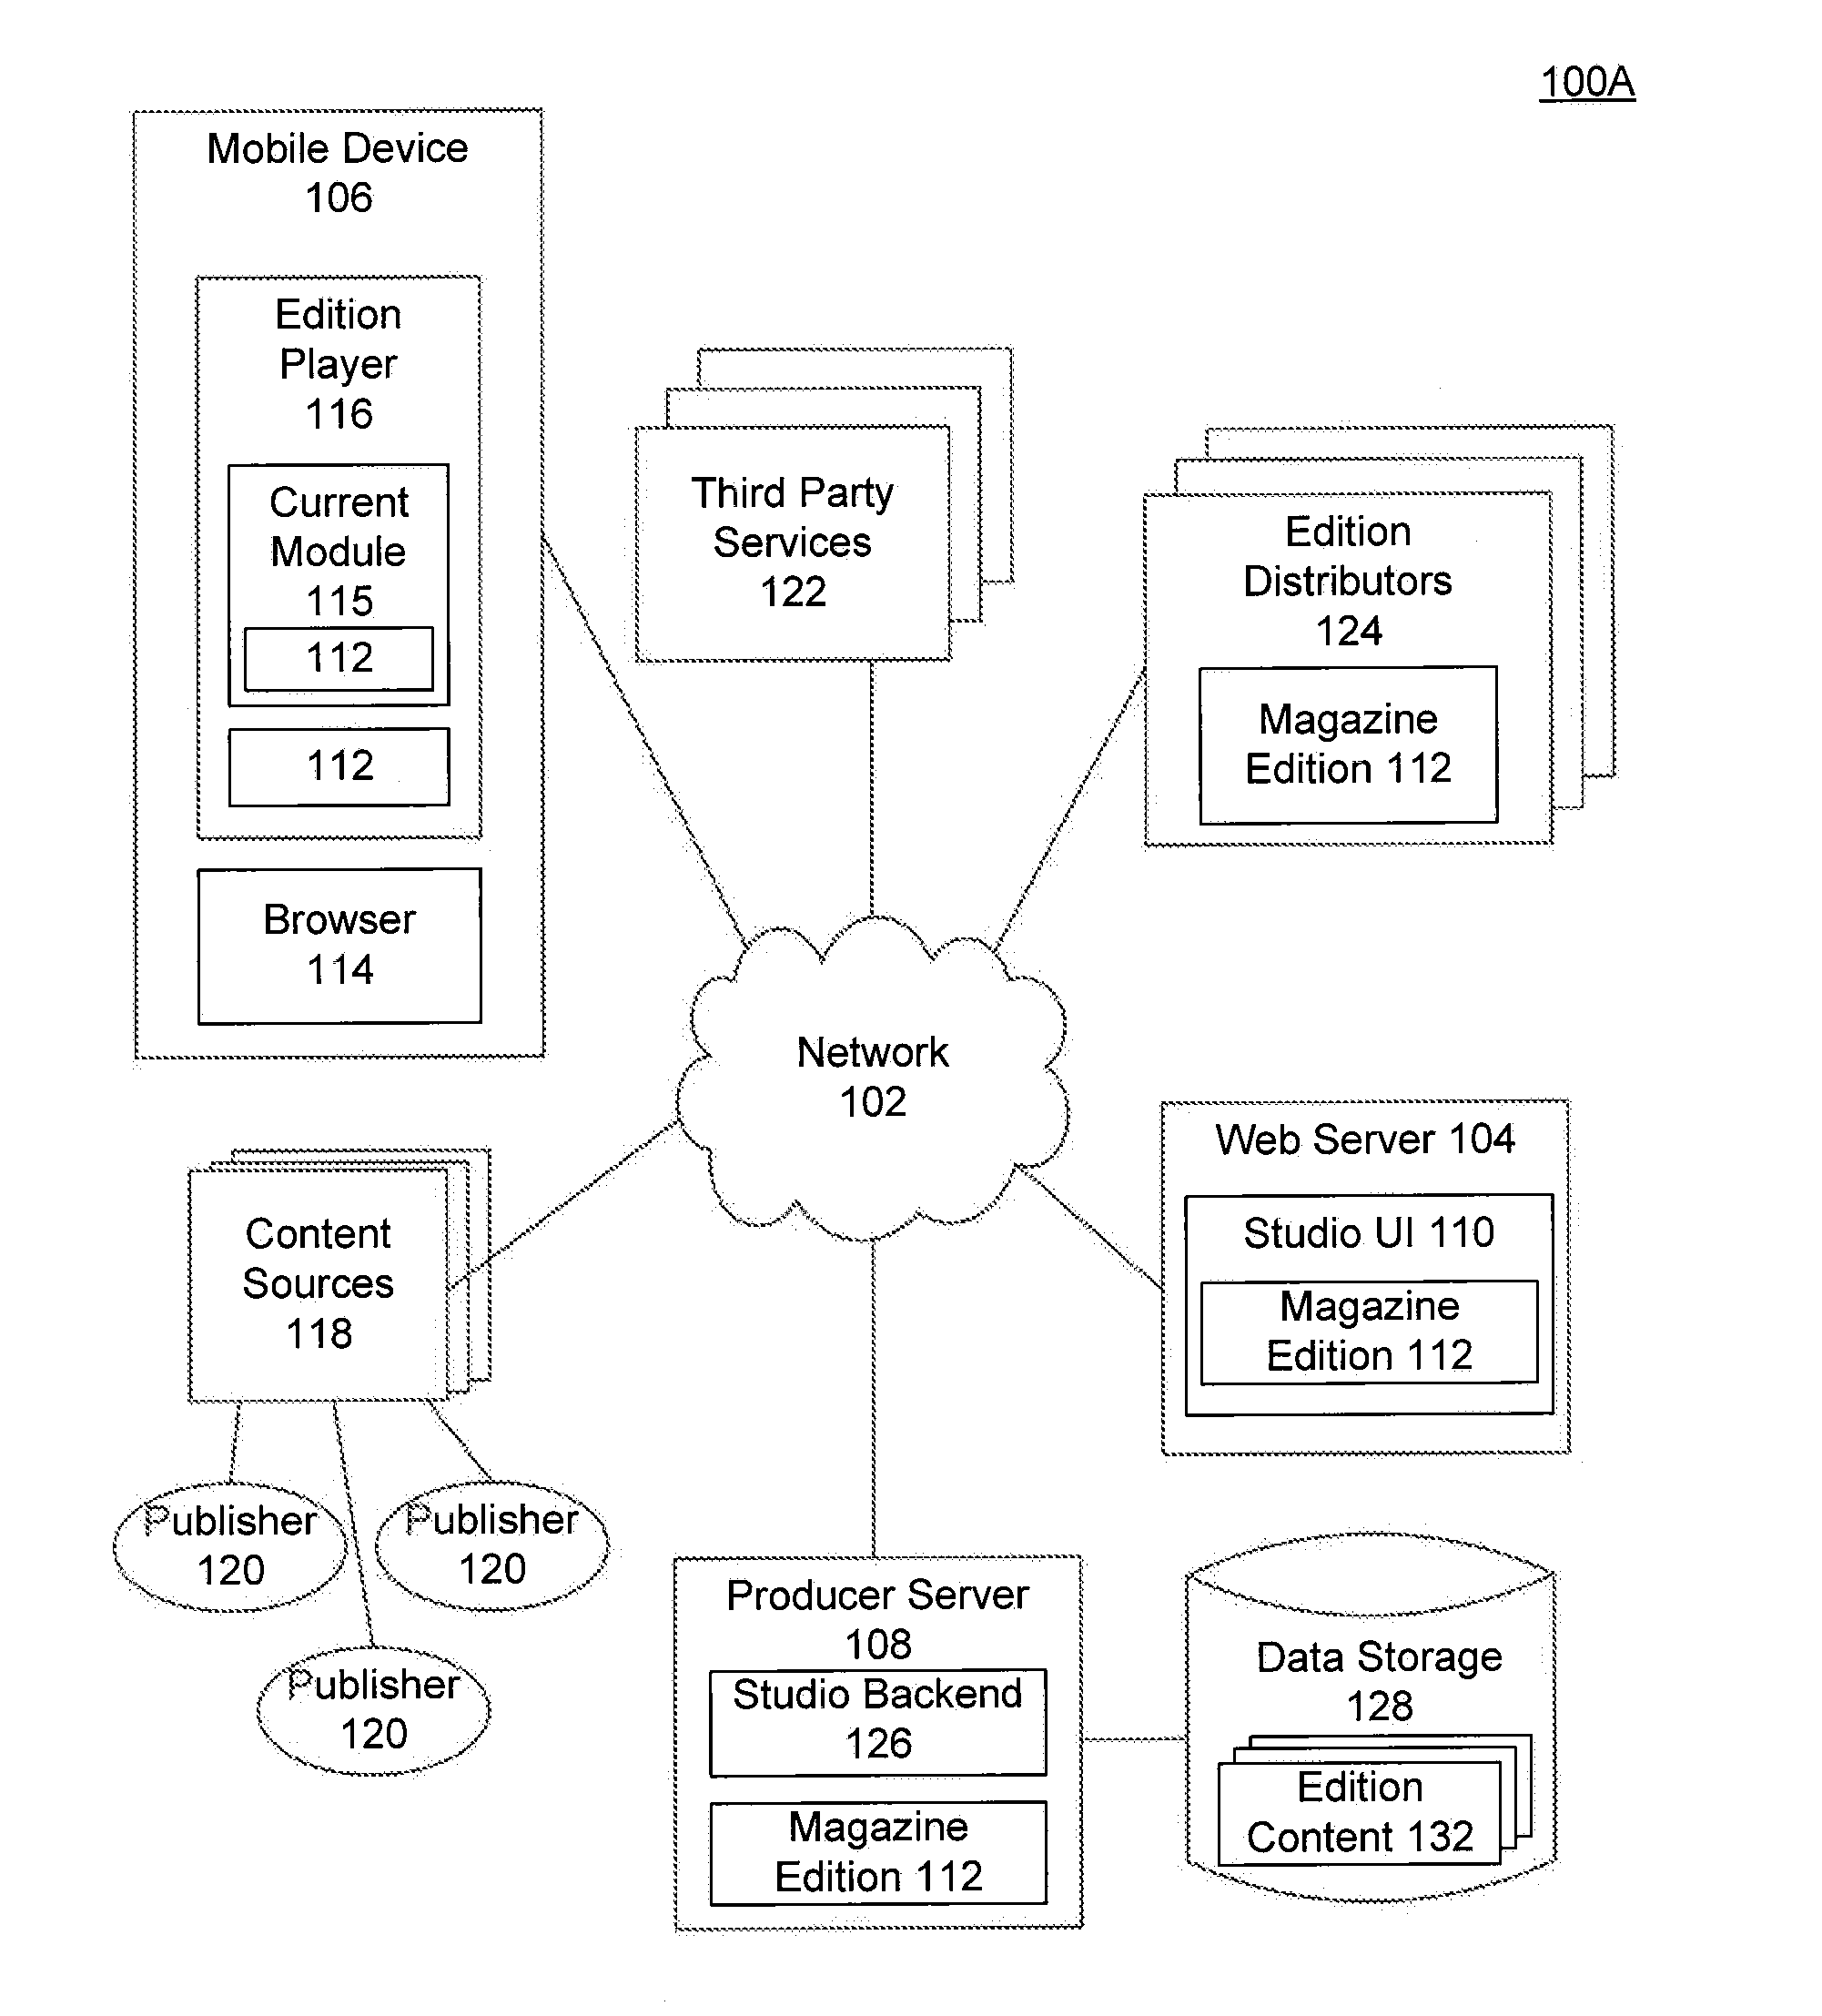 Laying Out Displaying Media Content Across Heterogeneous Computing Devices